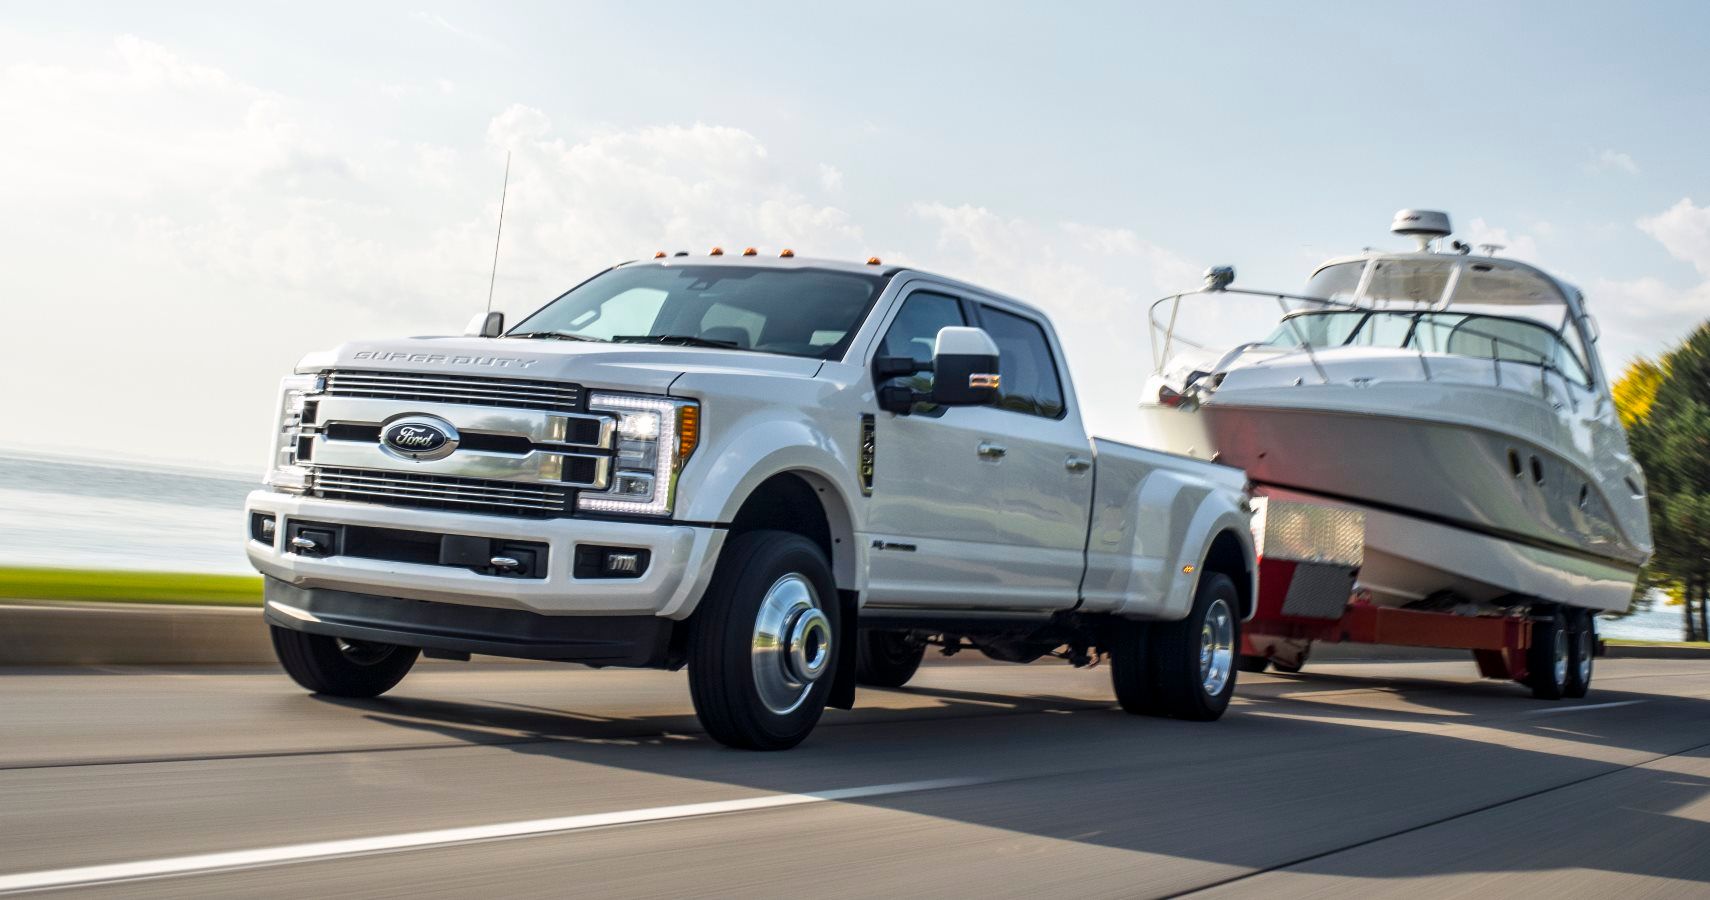 Review: Ford F-250 Super Duty - Power And Toughness